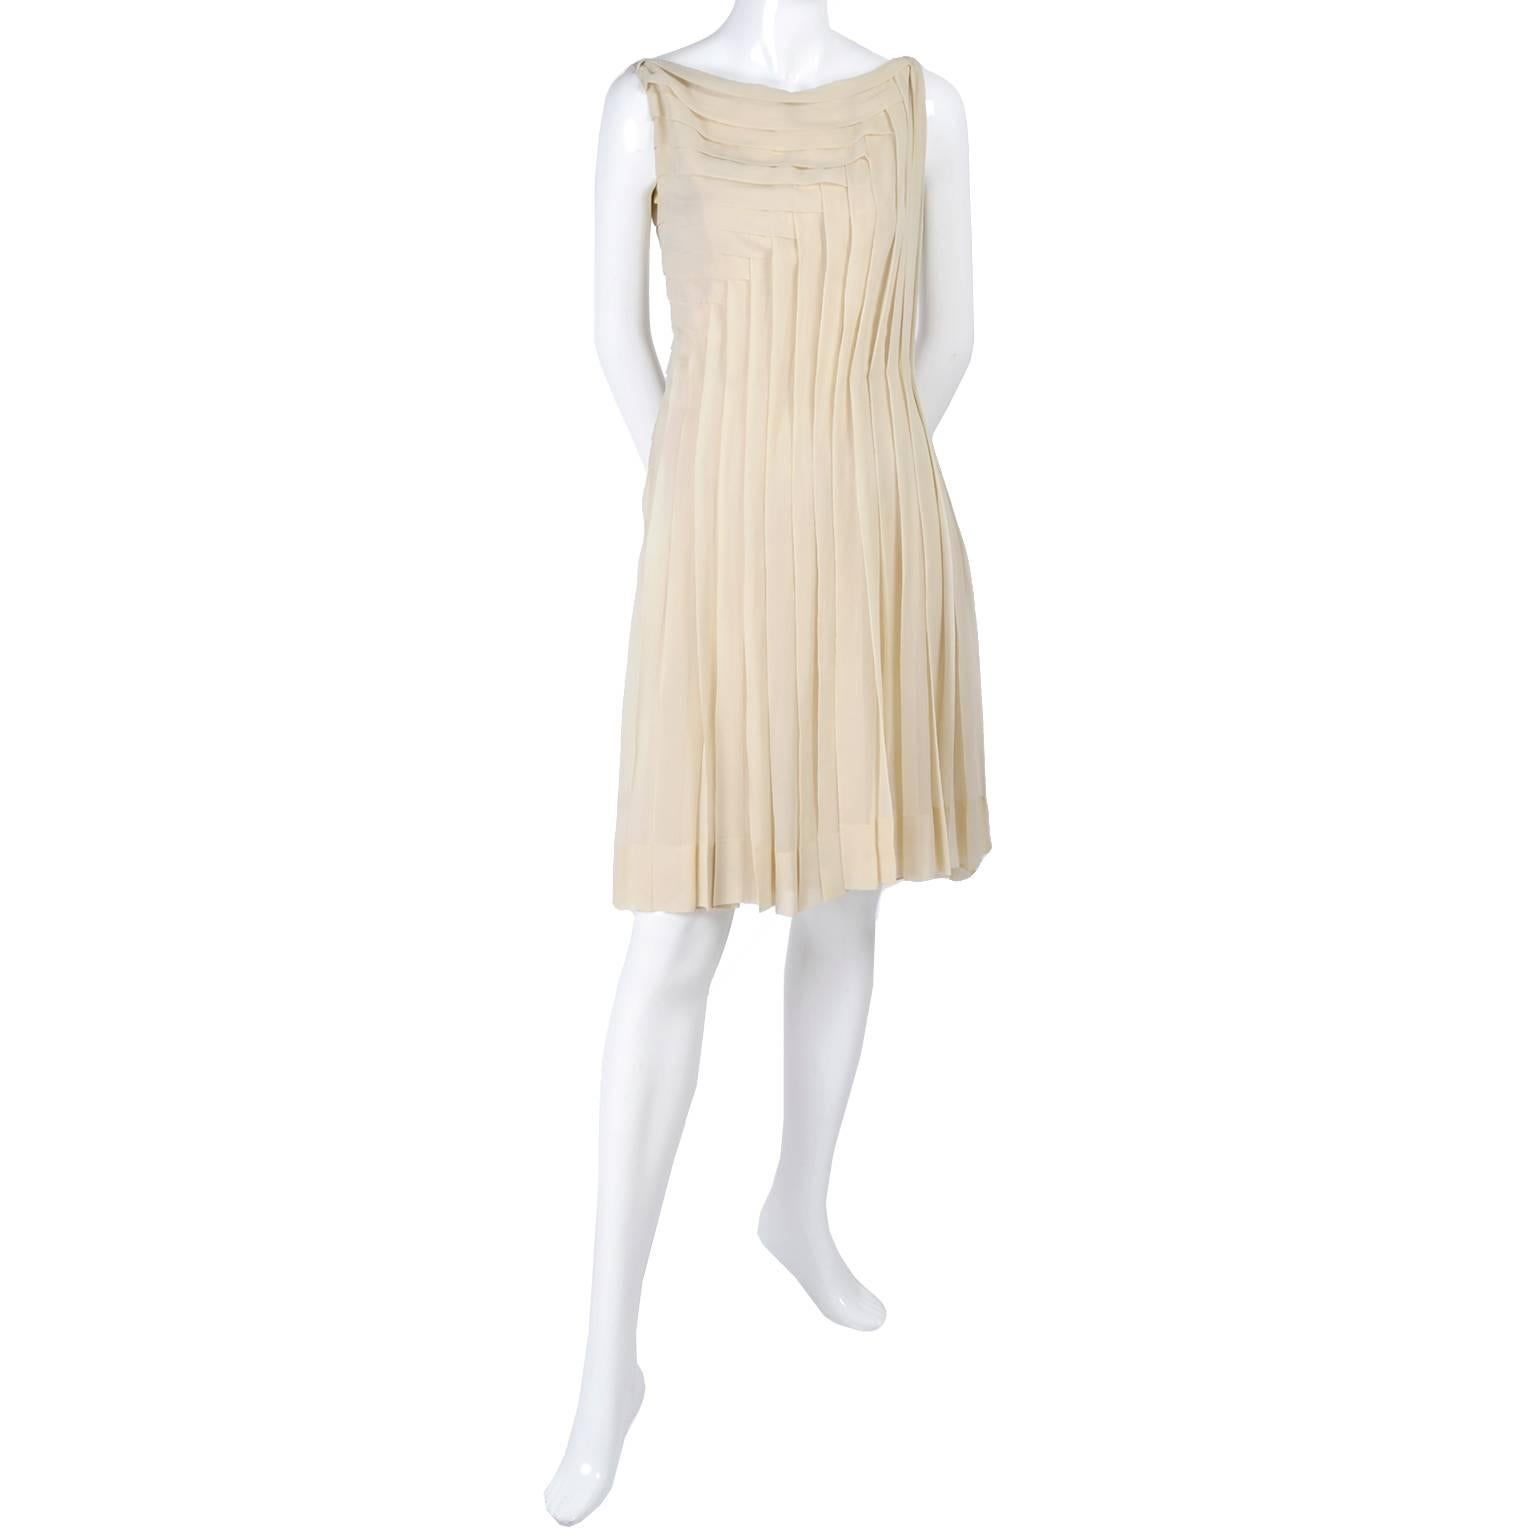 This is one of our favorite vintage dresses of all time! This exceptional nude tissue silk dress came from an estate of nothing but Chanel, Valentino, Hermes, Yves Saint Laurent and Givenchy vintage clothing. She had only the very best and many